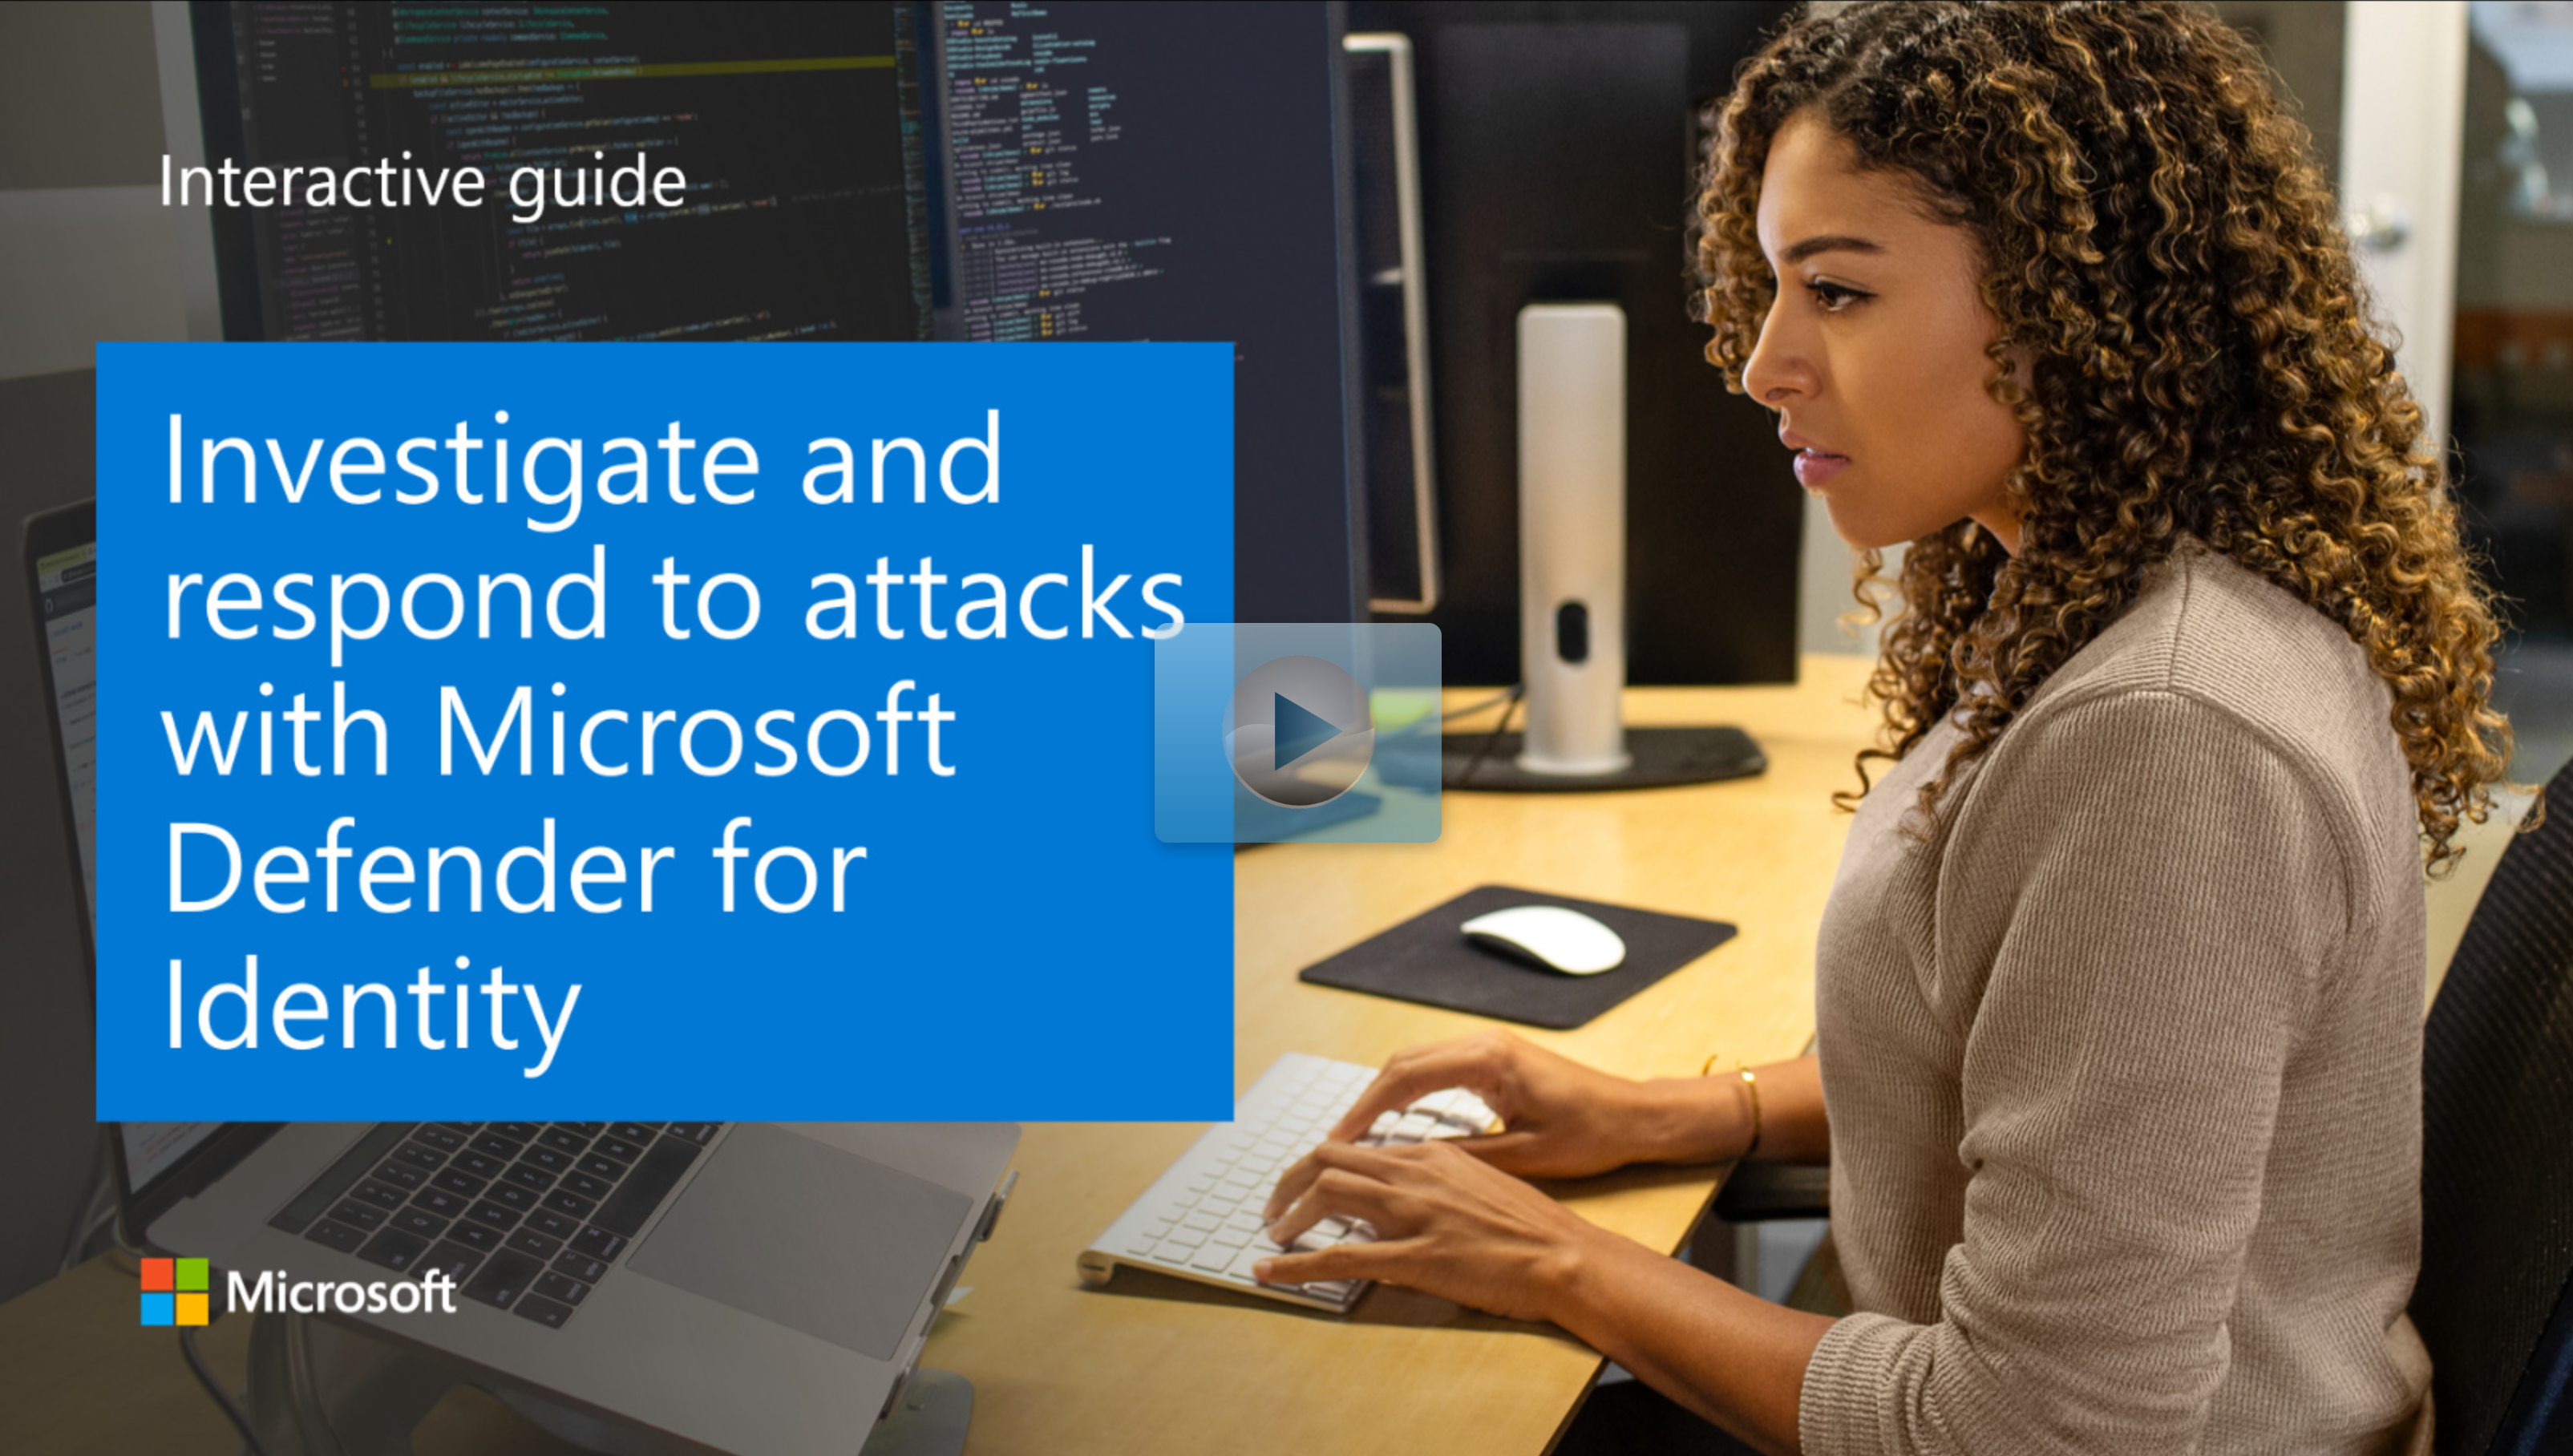 Investigate and respond to attacks with Microsoft Defender for Identity.